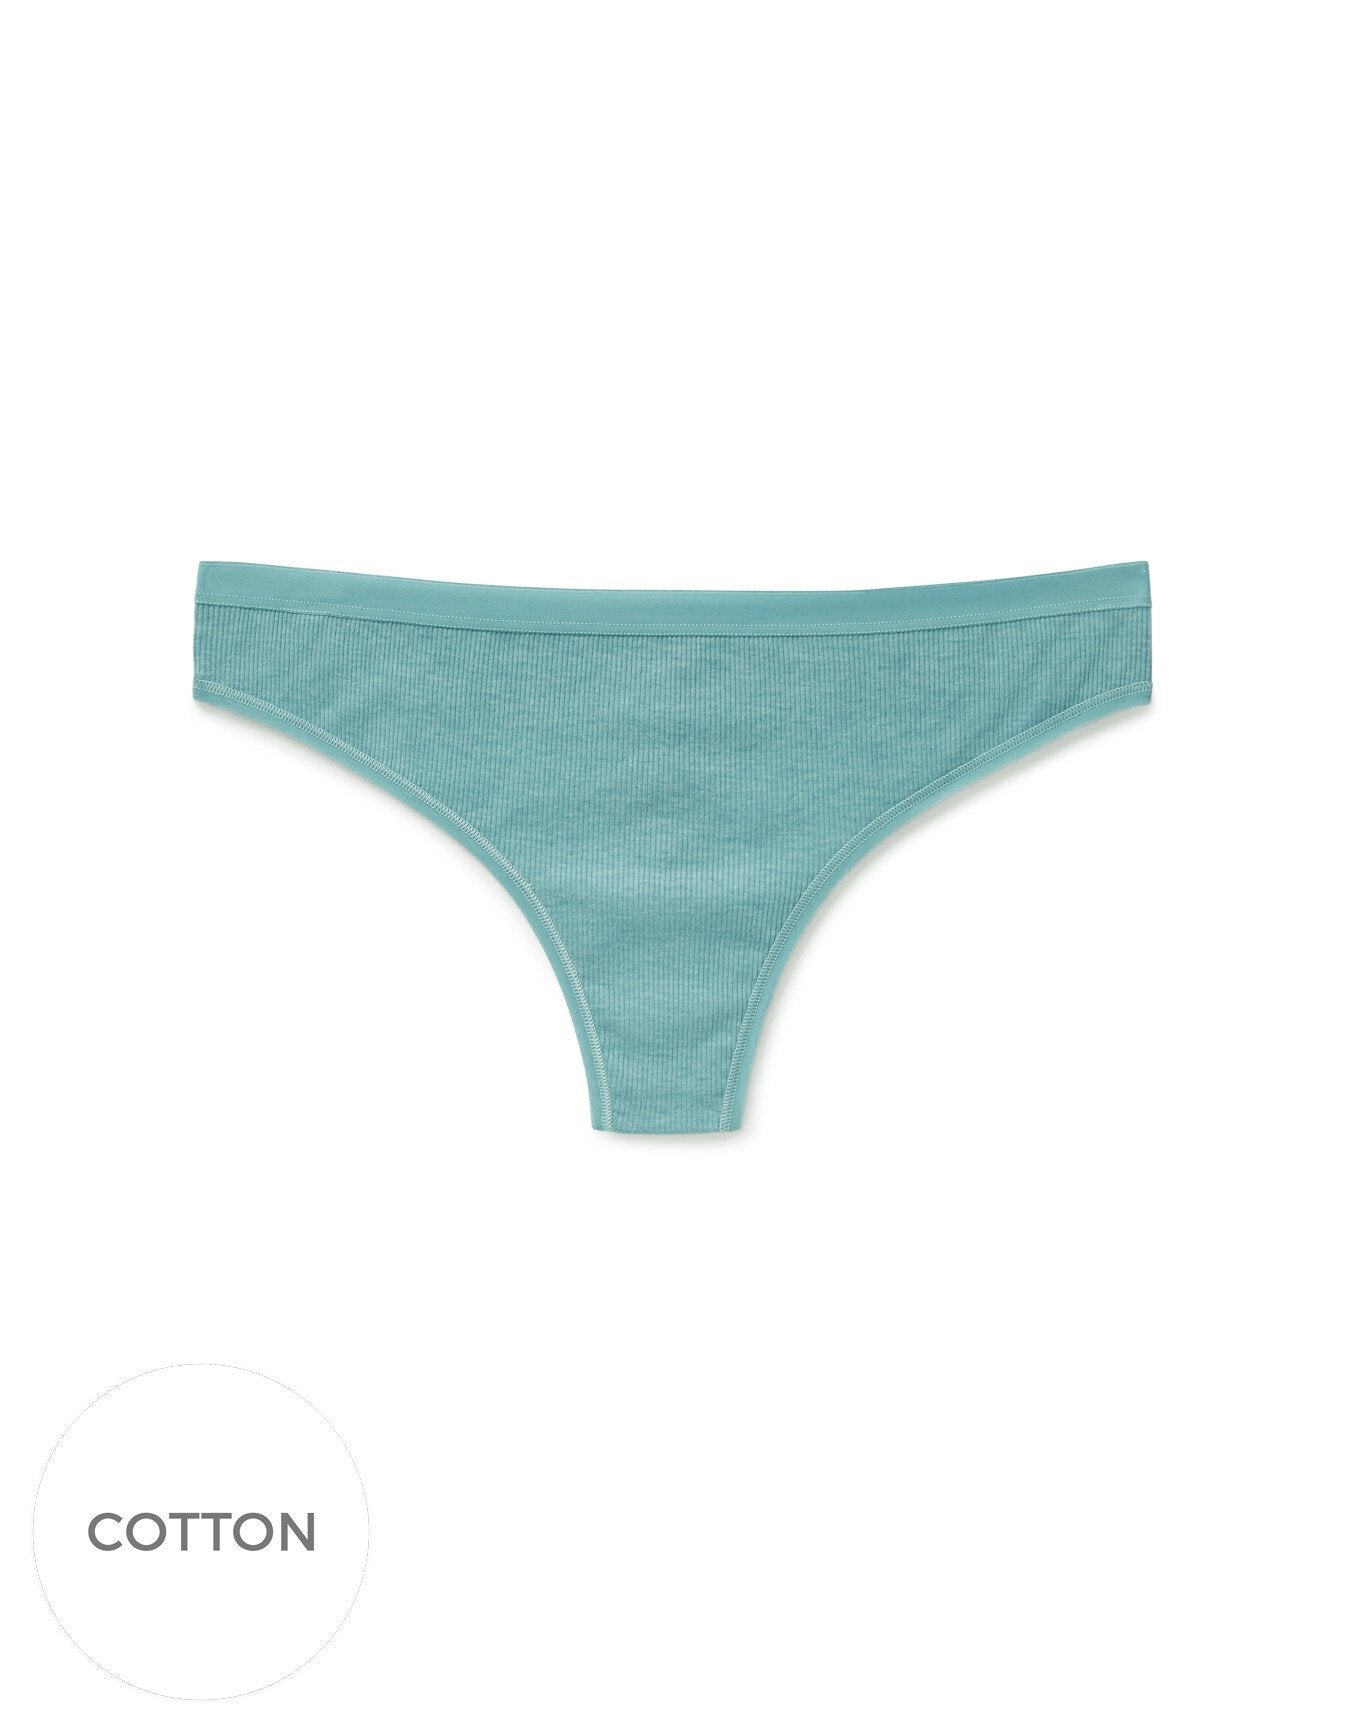 Adore Me Alexandra Ribbed Cotton Thong in color TidalWTurq 0EBJ and shape thong